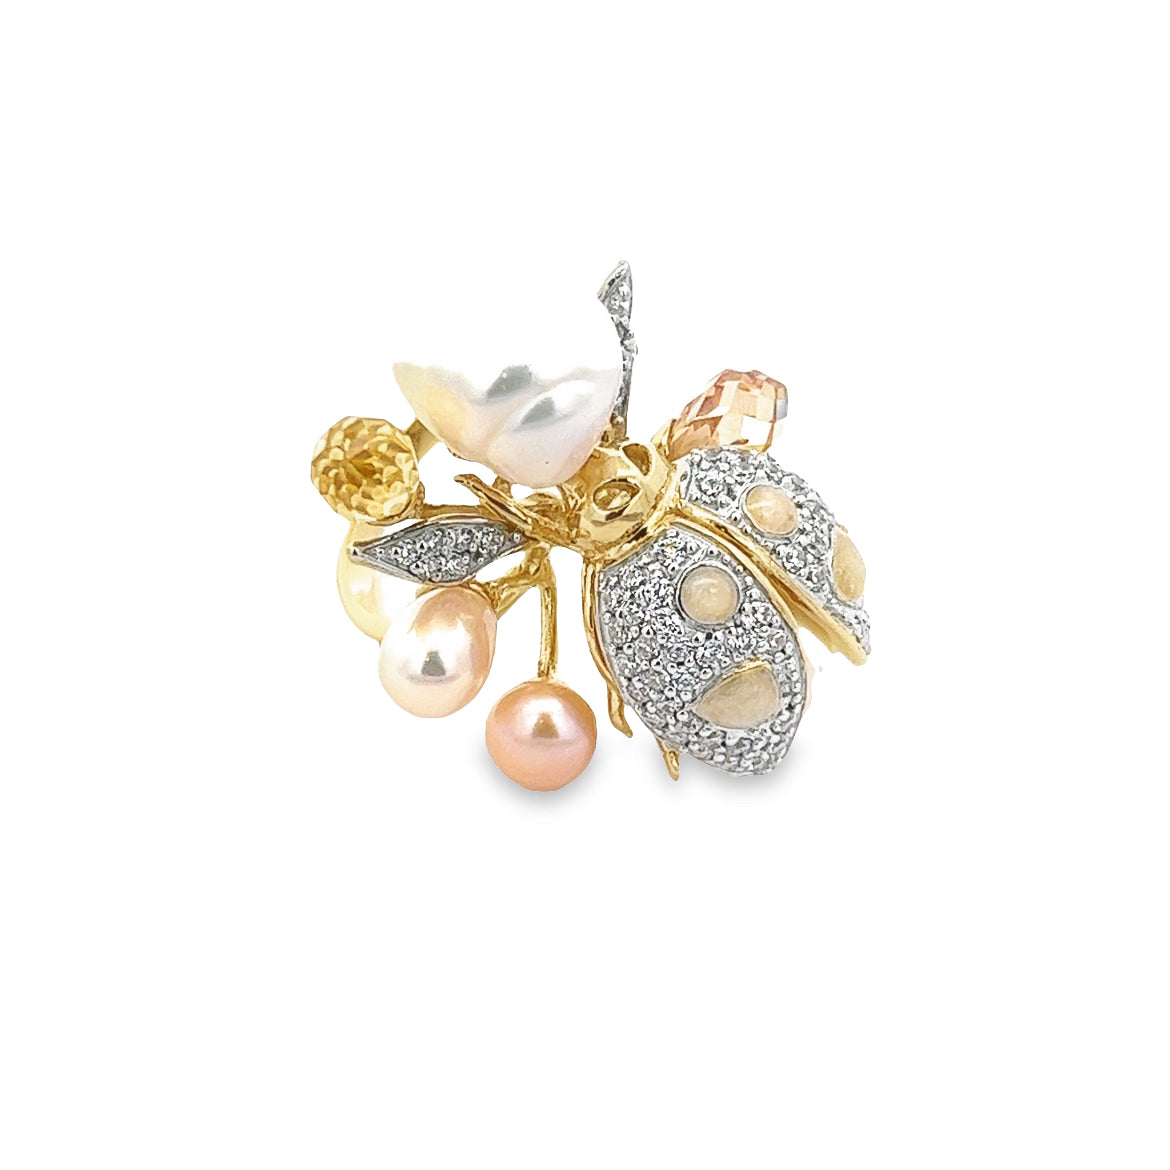 925 SILVER GOLD PLATED LADYBUG RING WITH PEARLS